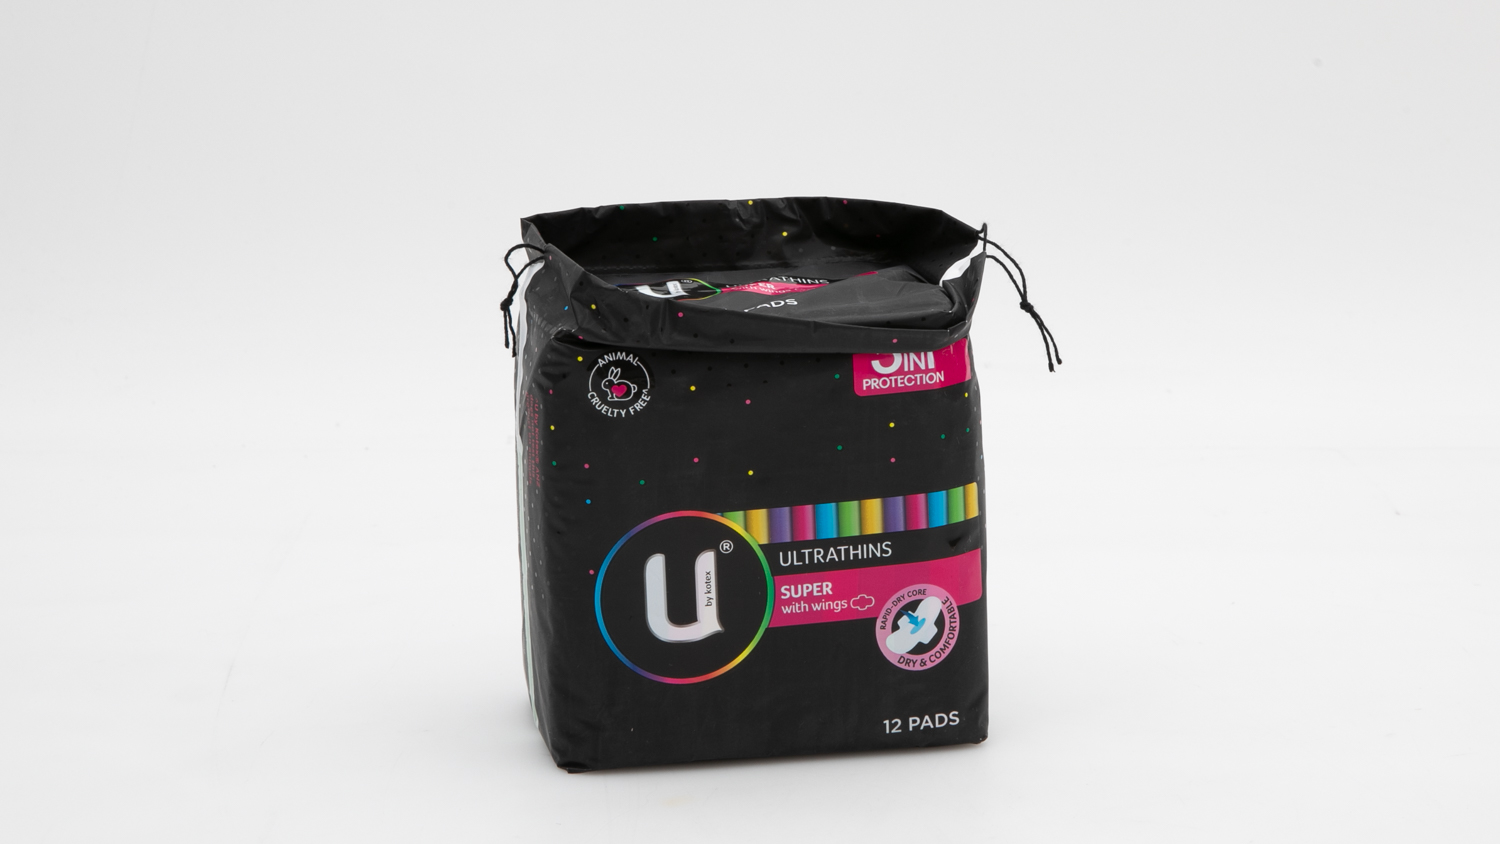 U by Kotex Ultrathins Super with wings Review, Sanitary pad